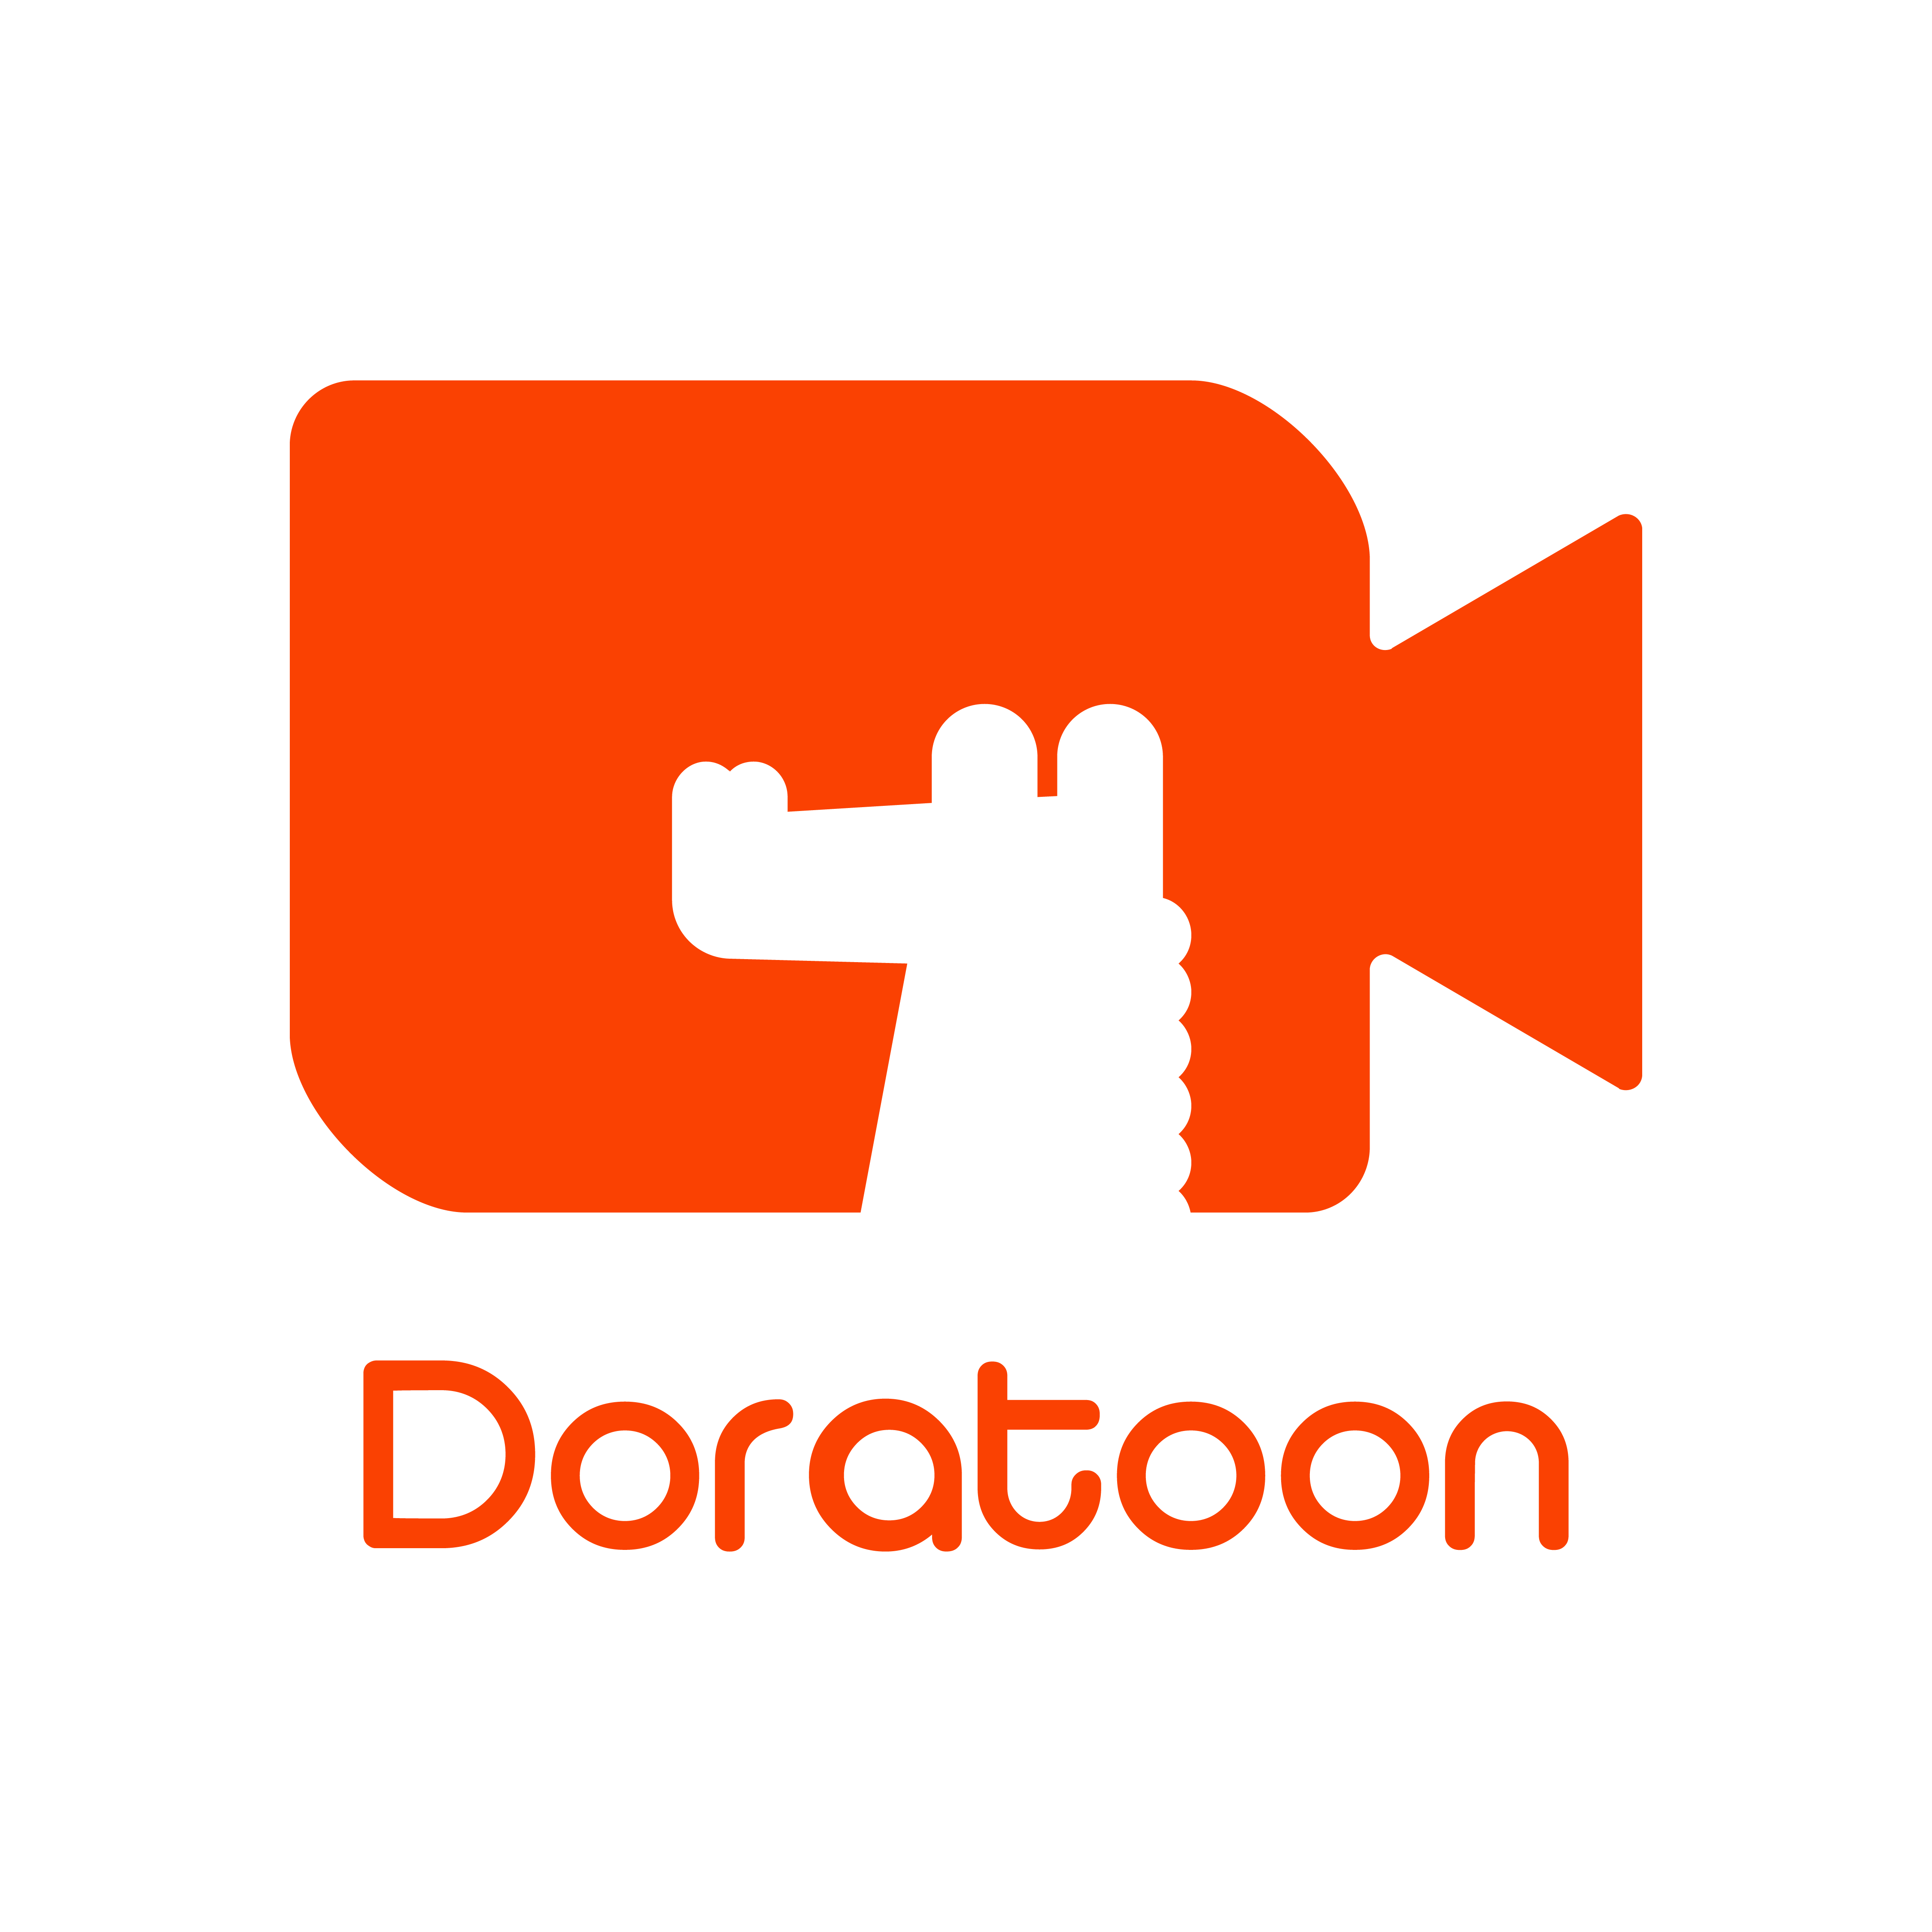 Doratoon Expands Its Business in Video Making With Its Personalized,  Cognitive Animation Software | Newswire